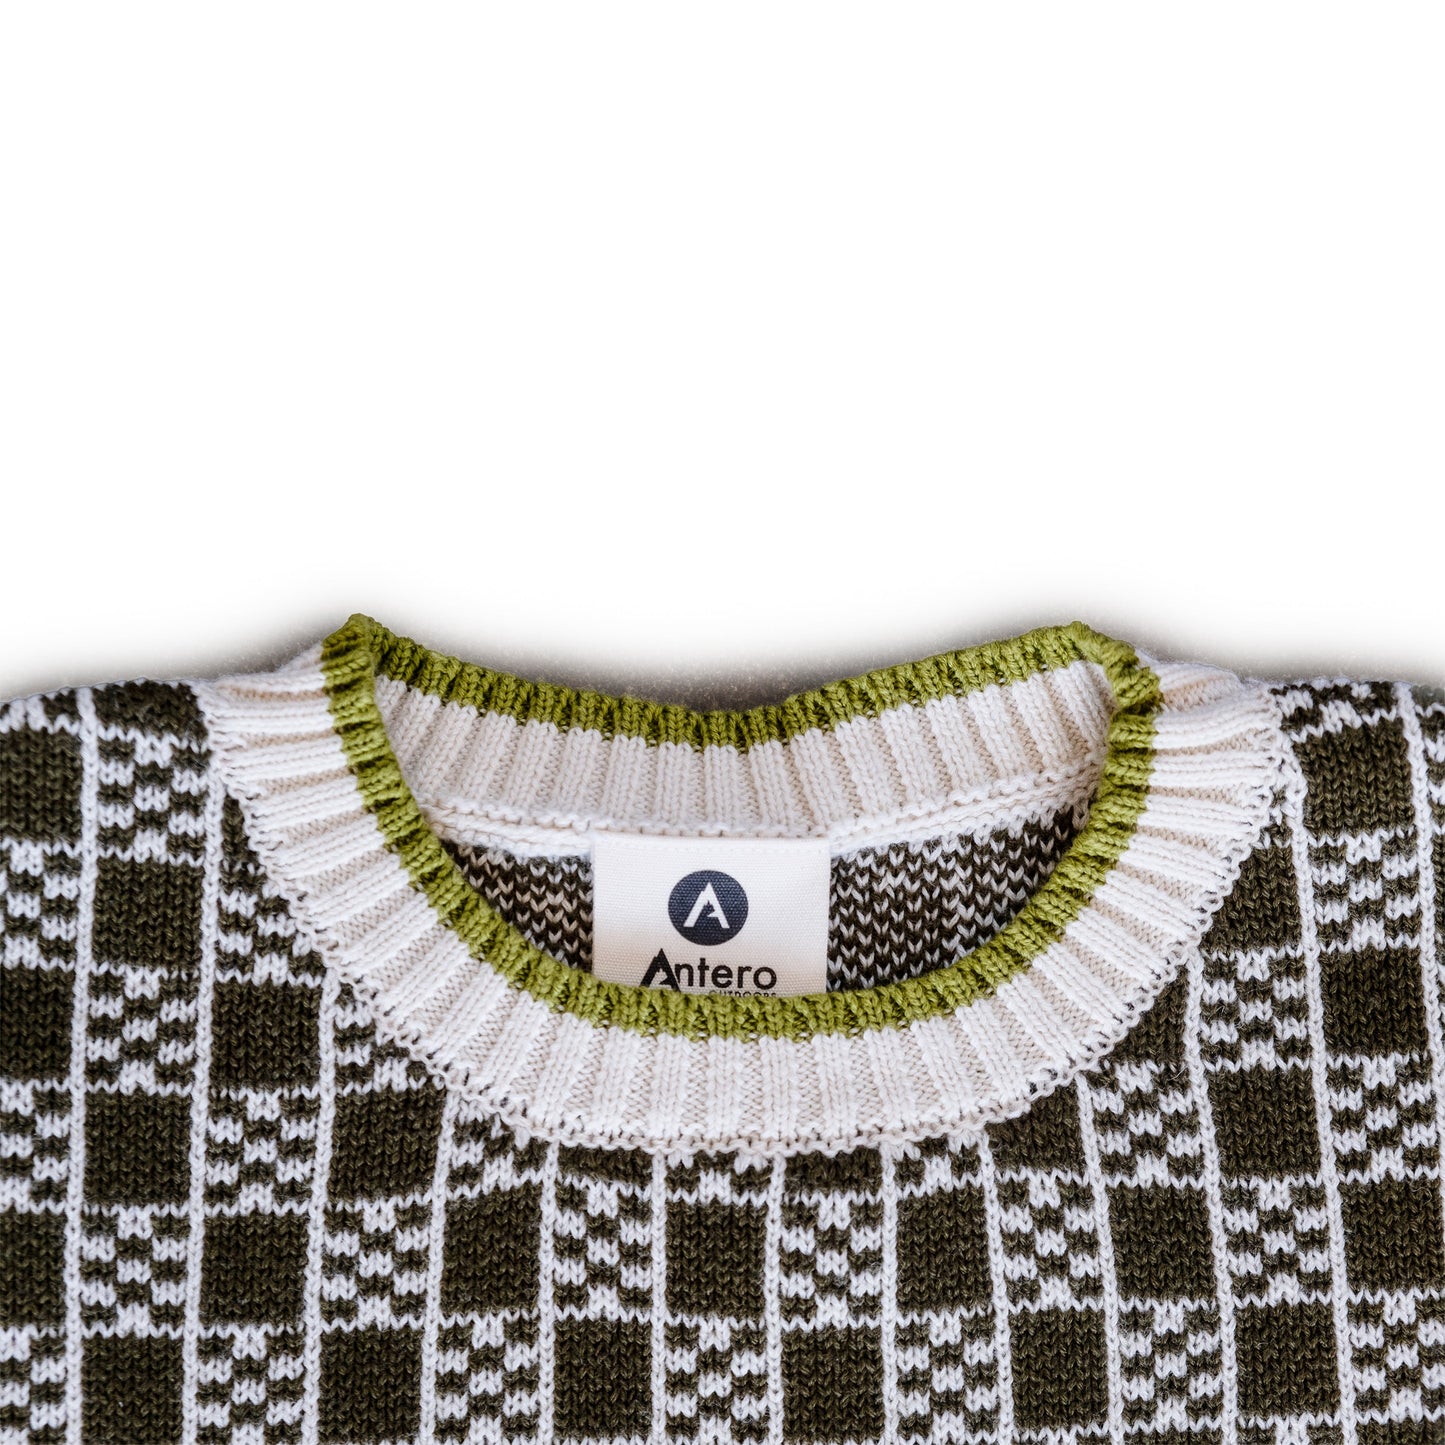 Patterned Crew Sweater-Olive Green / Natural